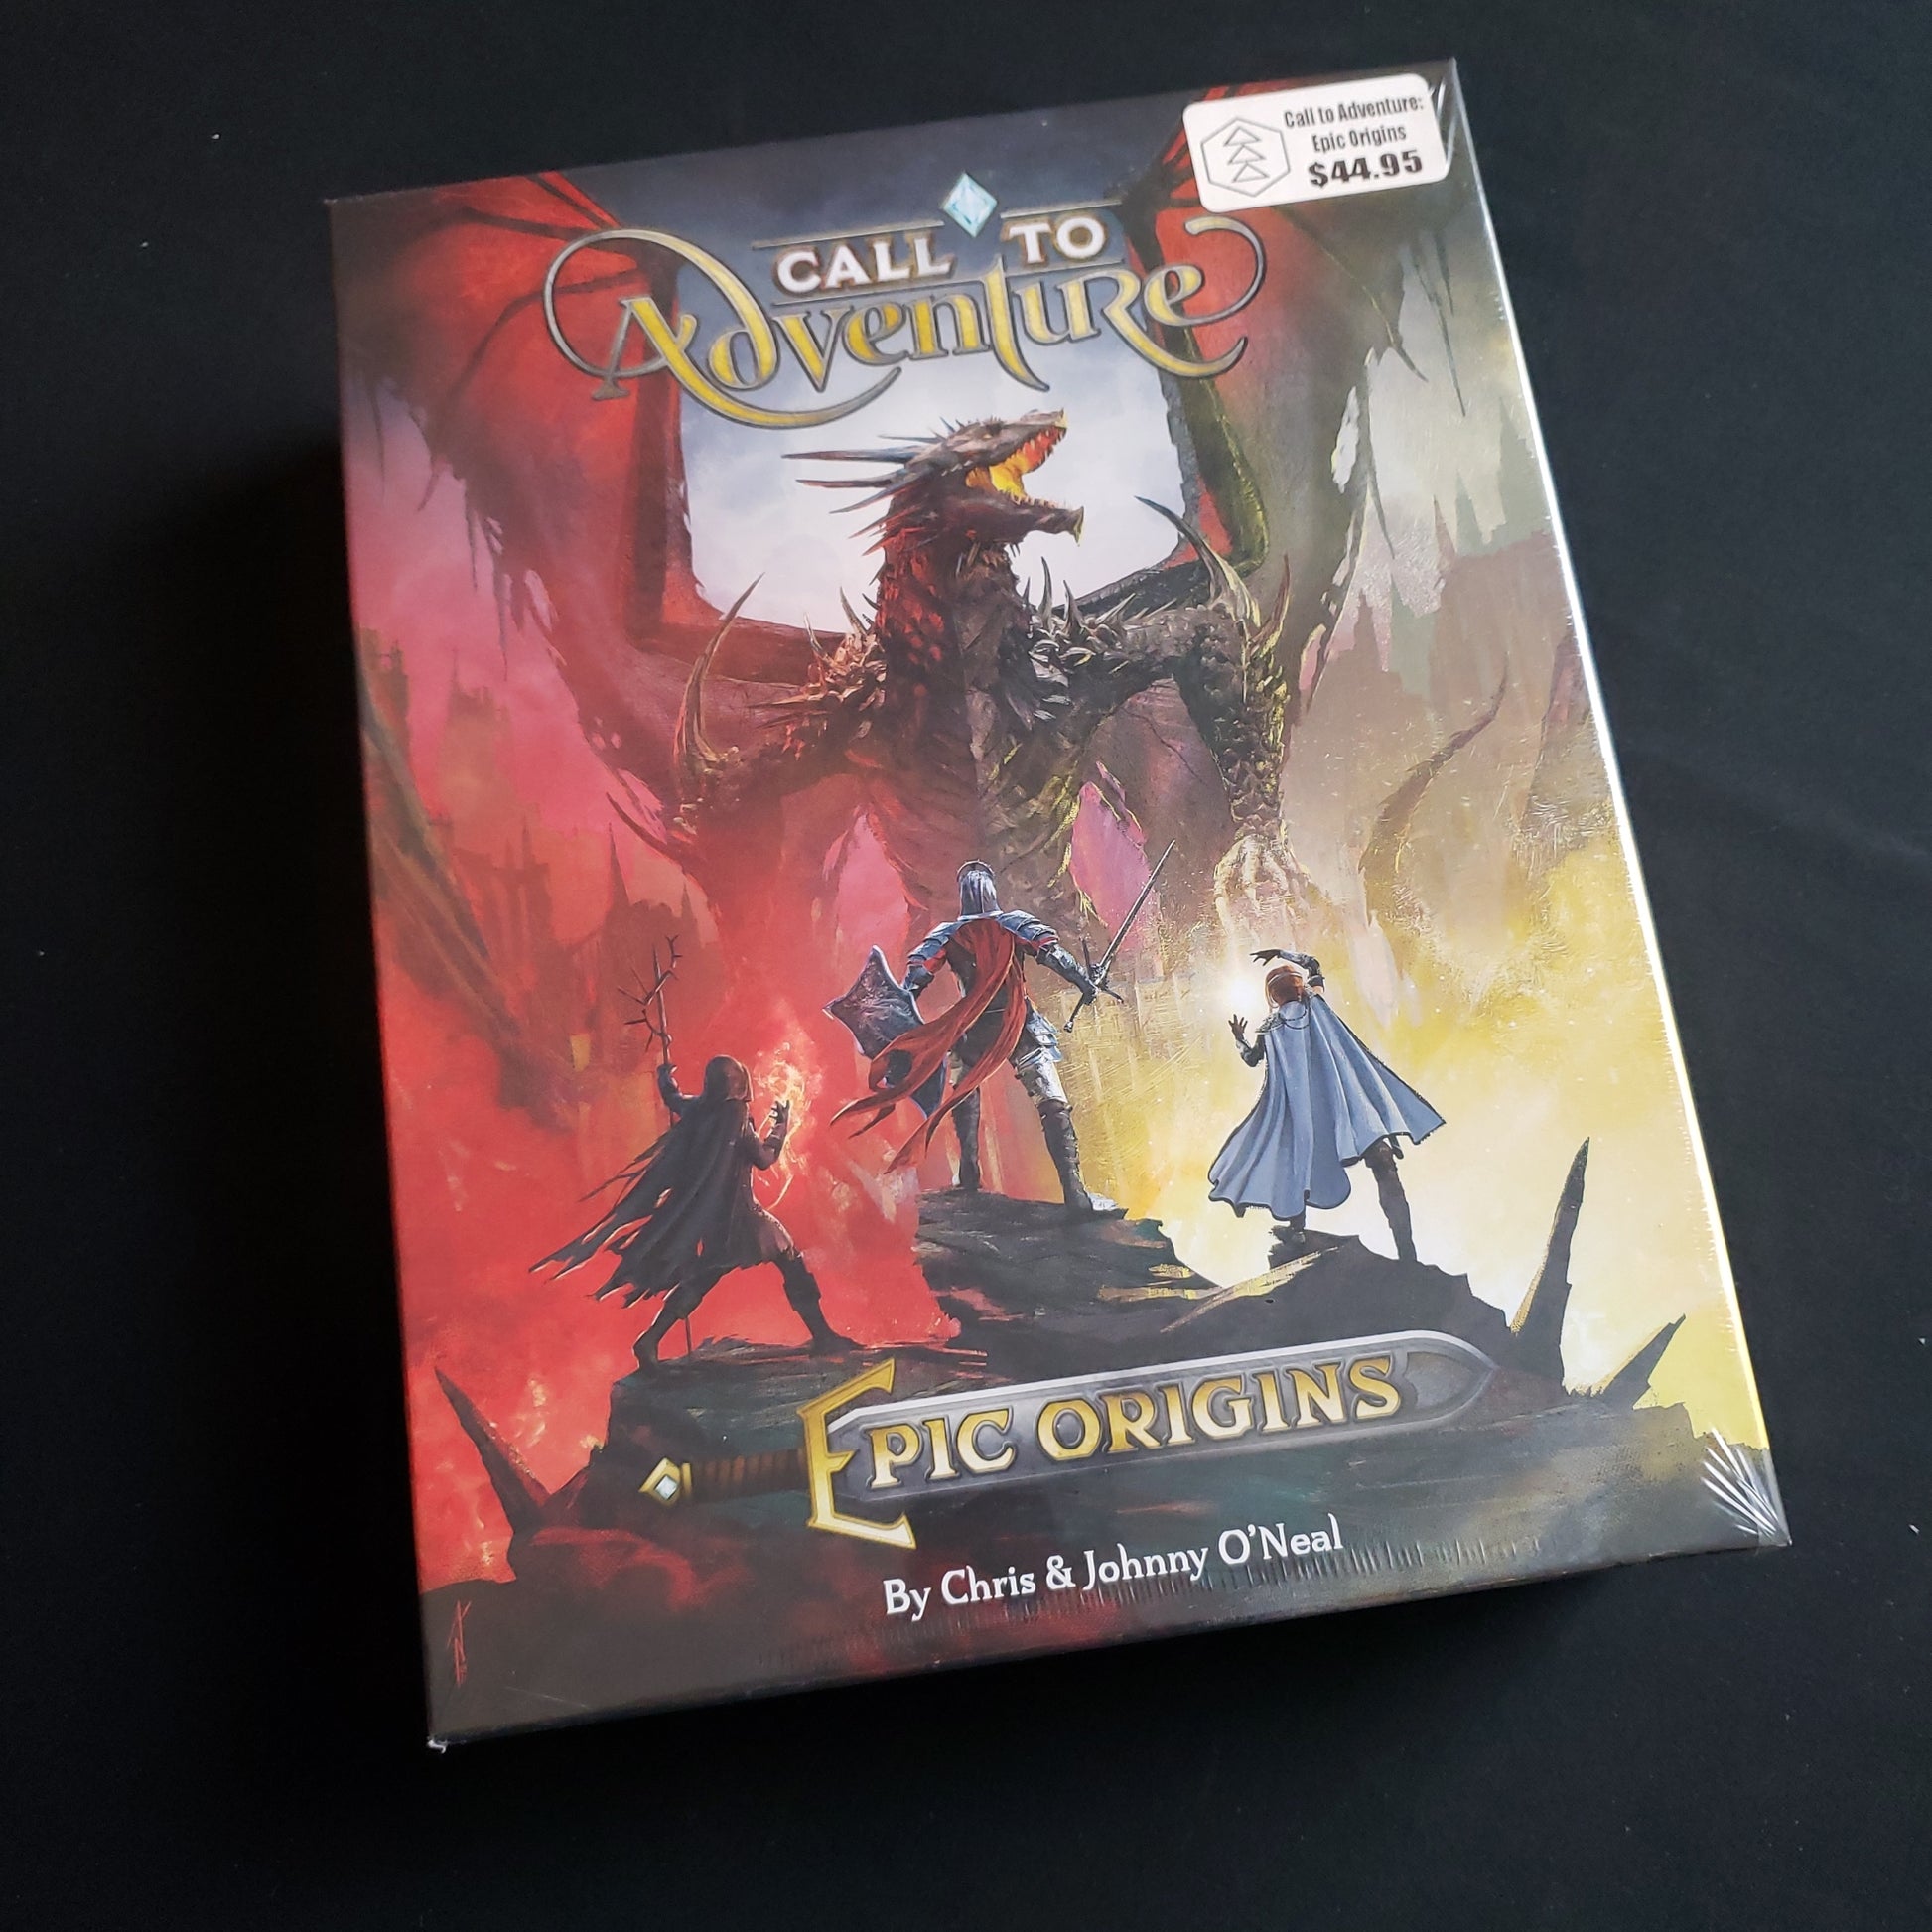 Image shows the front cover of the box of the Call to Adventure: Epic Origins board game